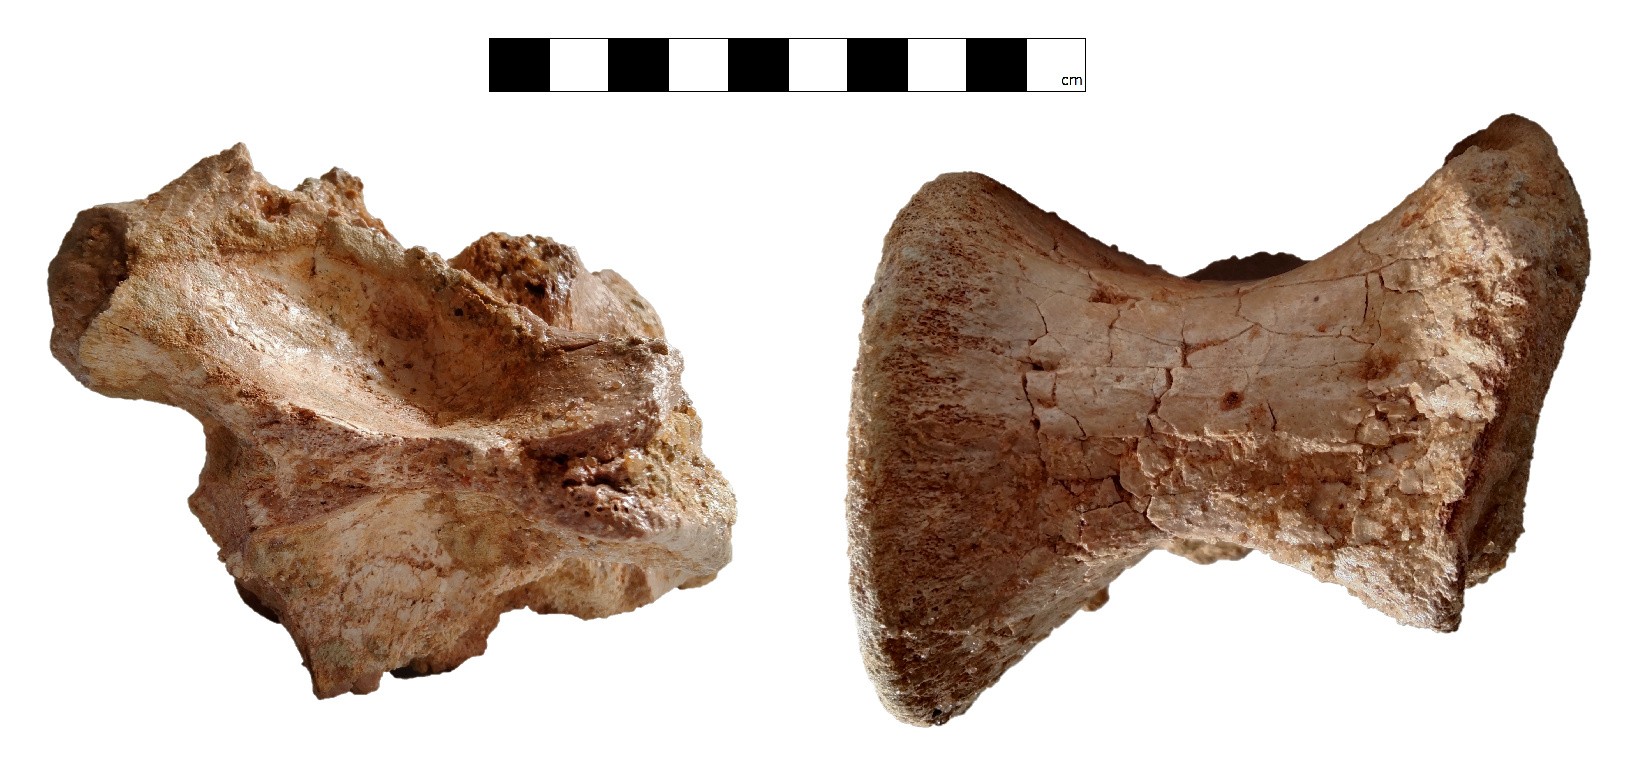 Proximal caudal vertebra (GCE2104146785) of Spinosaurid tentatively refer as Spinosaurus dorsojuvencus. From left image: in dorsal view (top view, anterior face to the left); Right image: in ventral view (bottom view, anterior face to the left)